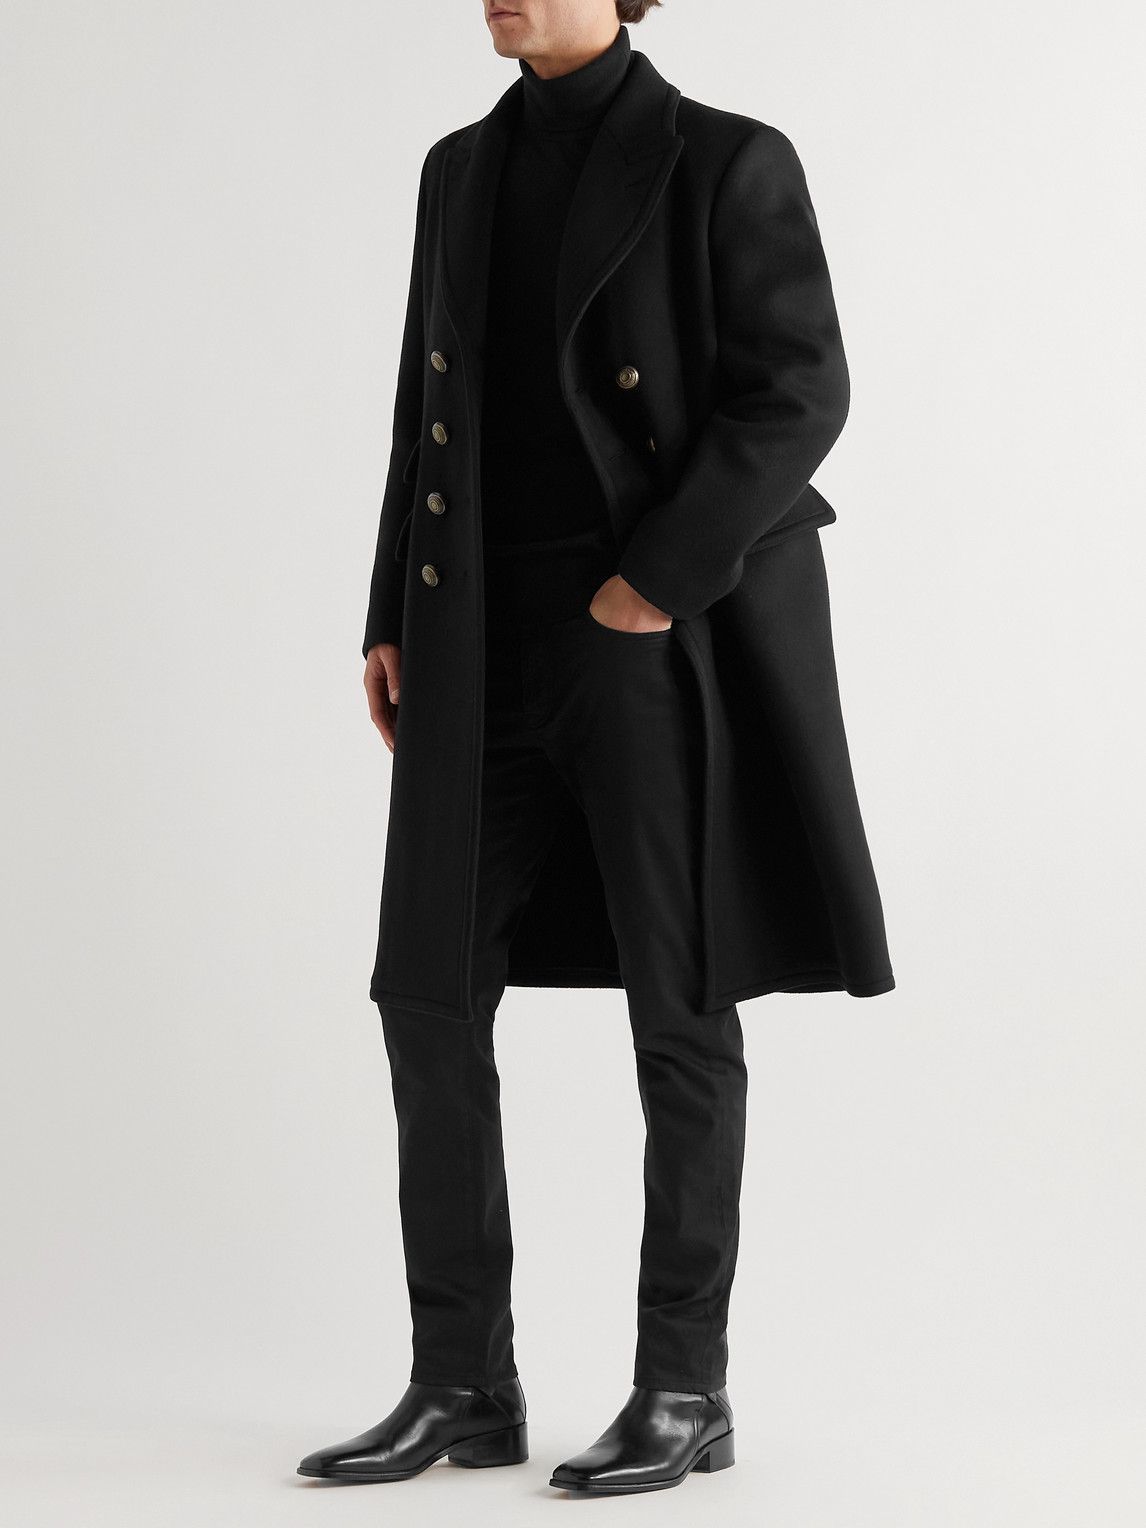 TOM FORD - Slim-Fit Double-Breasted Wool and Cashmere-Blend Coat - Black TOM  FORD